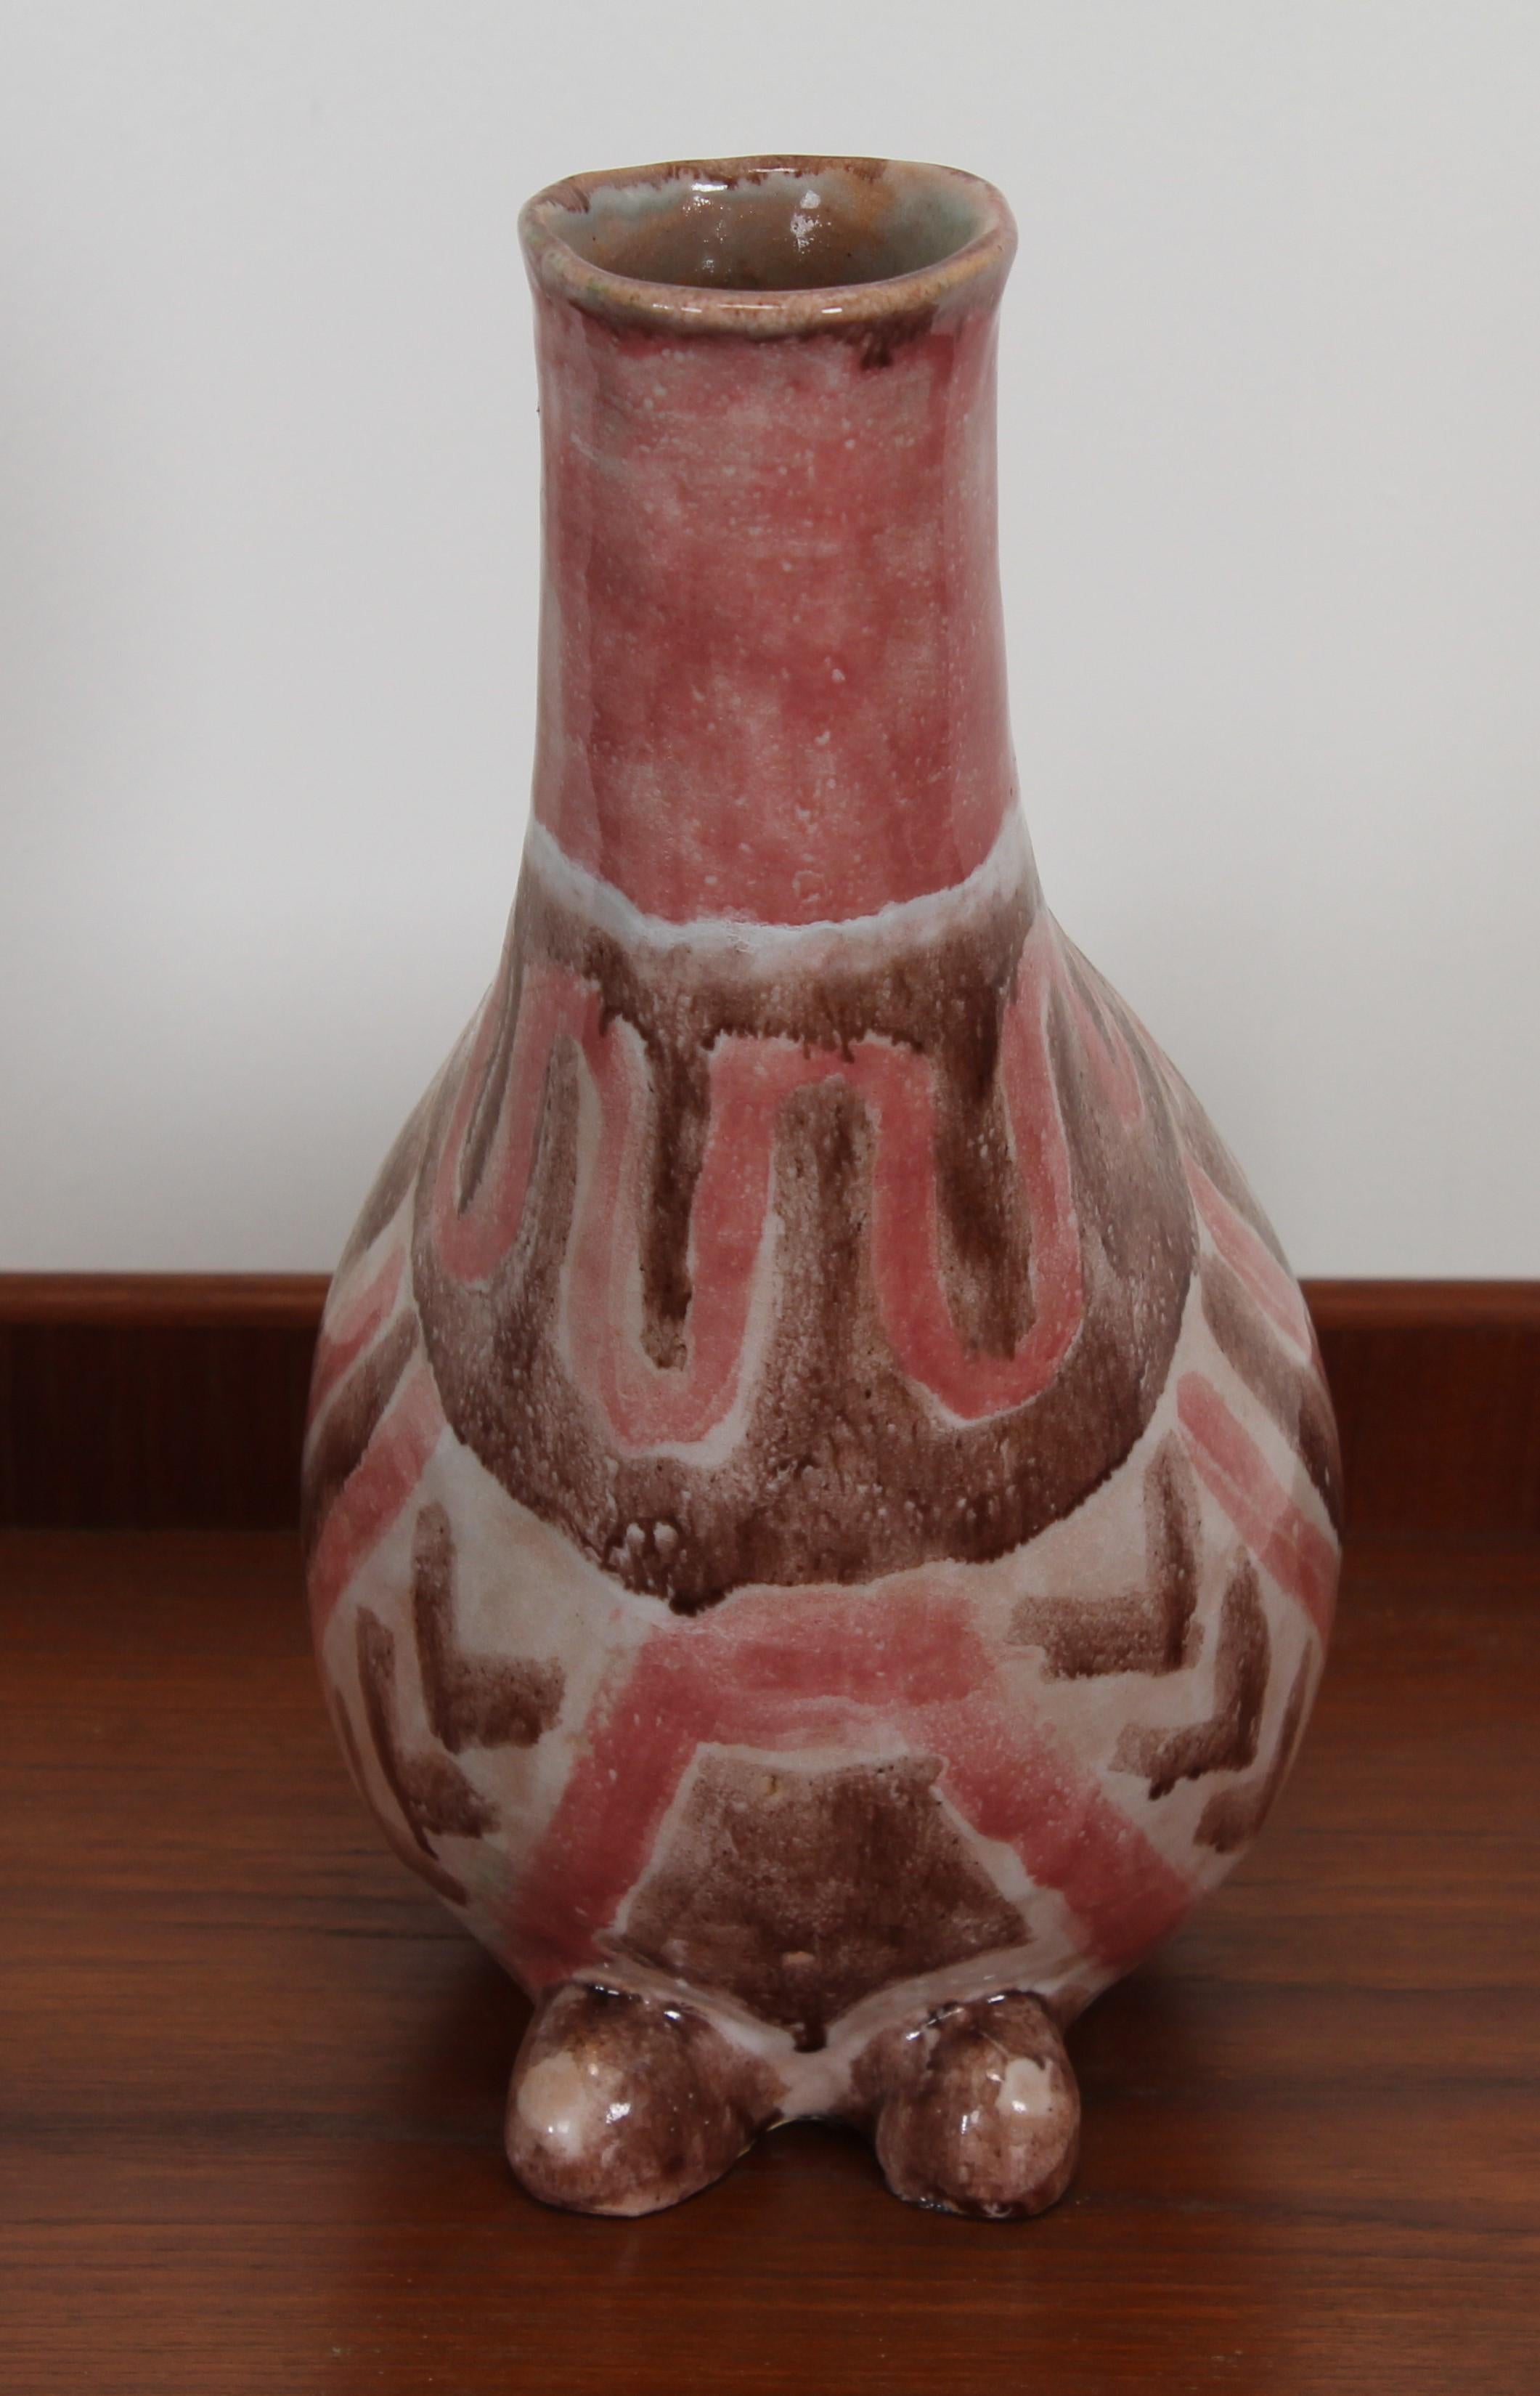 An artist-made, handcrafted Italian Picasso-style pottery sculpture from the 1950s. The partial label on the bottom is illegible. No cracks or chips are noticeable.  Raymor, Bitossi, Rosenthal style. 

Dimensions: 11.25